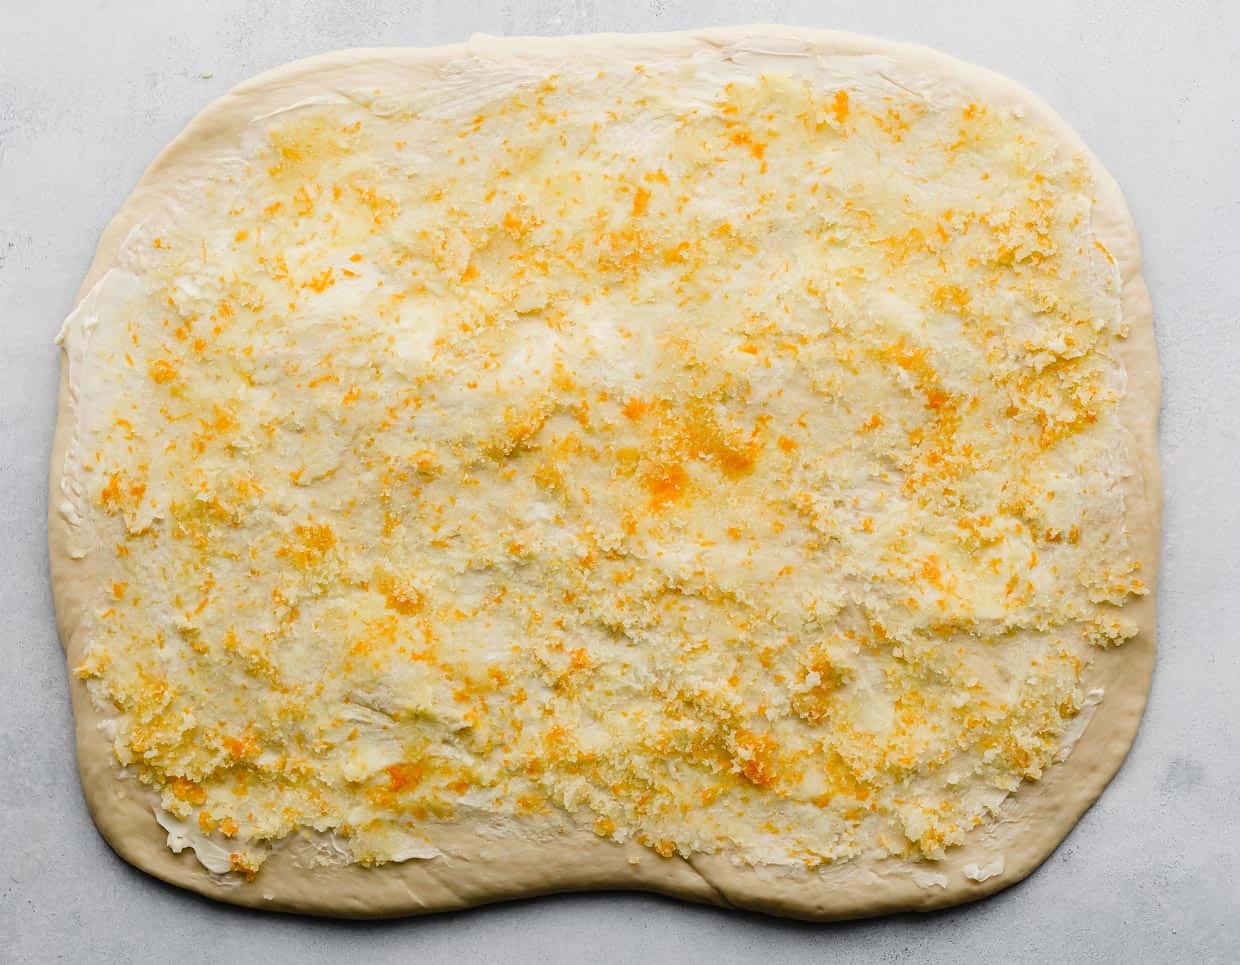 An orange sugar mixture spread over a rectangle sheet or rolled out dough.